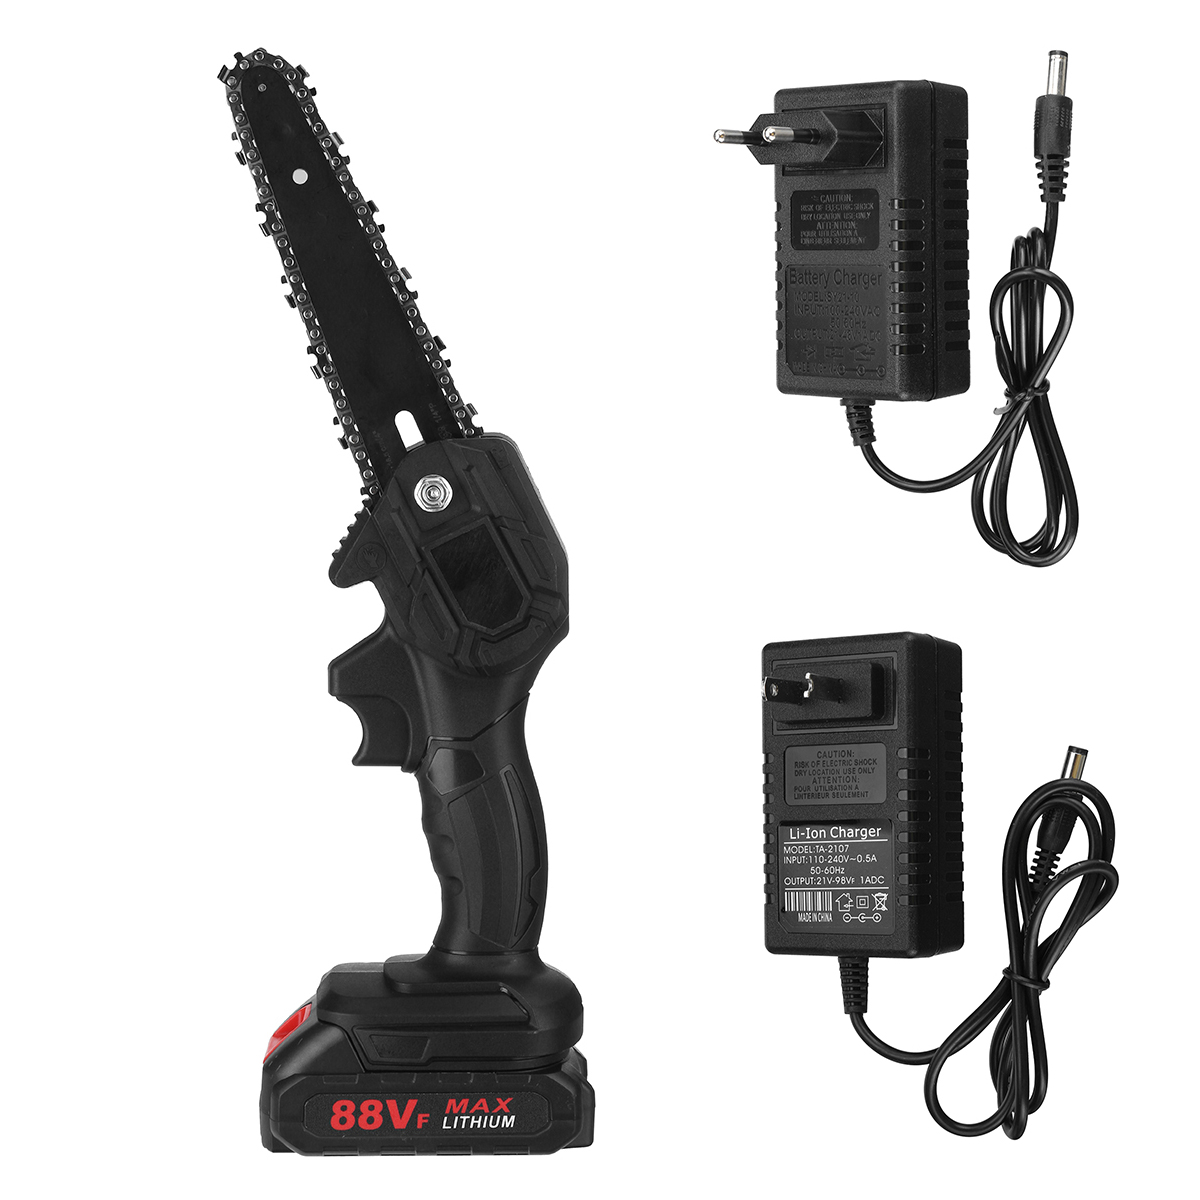 6Inch-1200W-21V-Electric-Chain-Saw-Pruning-ChainSaw-Cordless-Woodworking-Cutter-Tool-W-012pcs-Batter-1805854-10